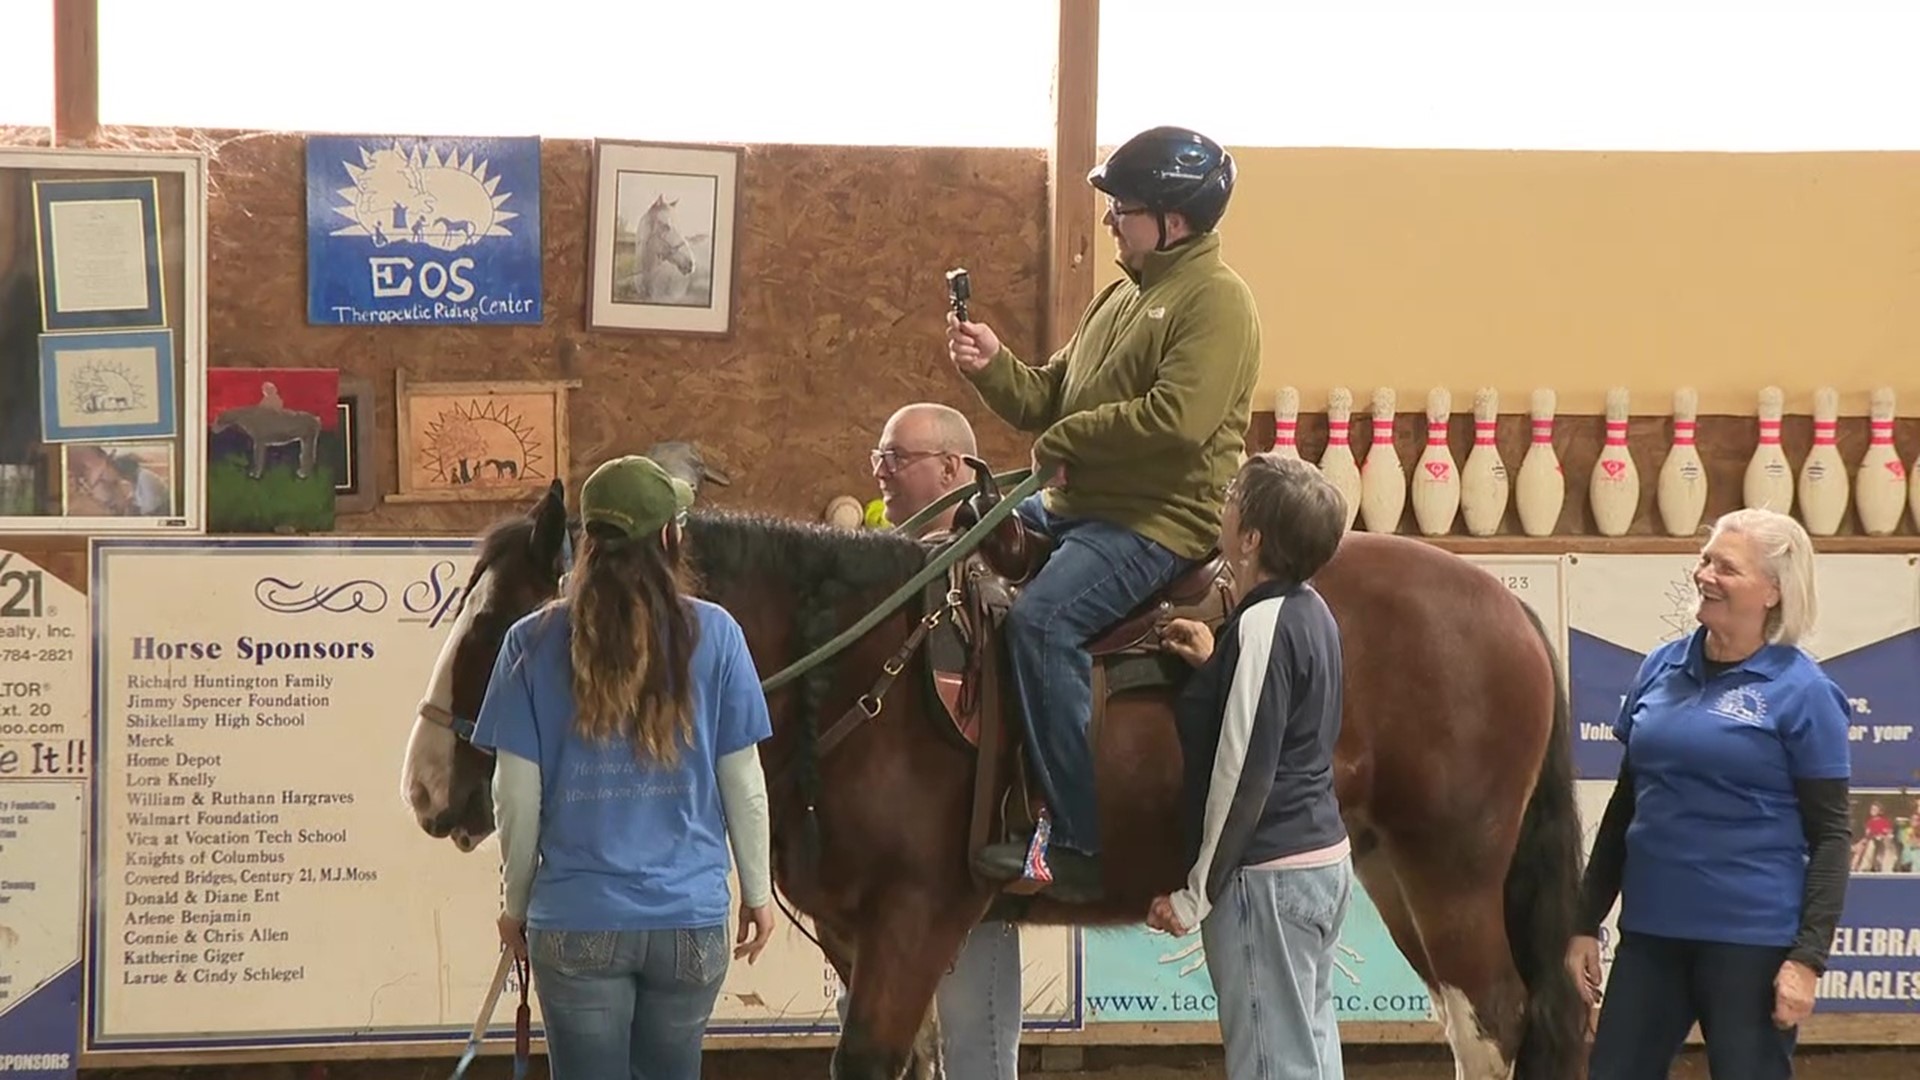 The nonprofit provides therapeutic horseback riding to children and adults with special abilities.